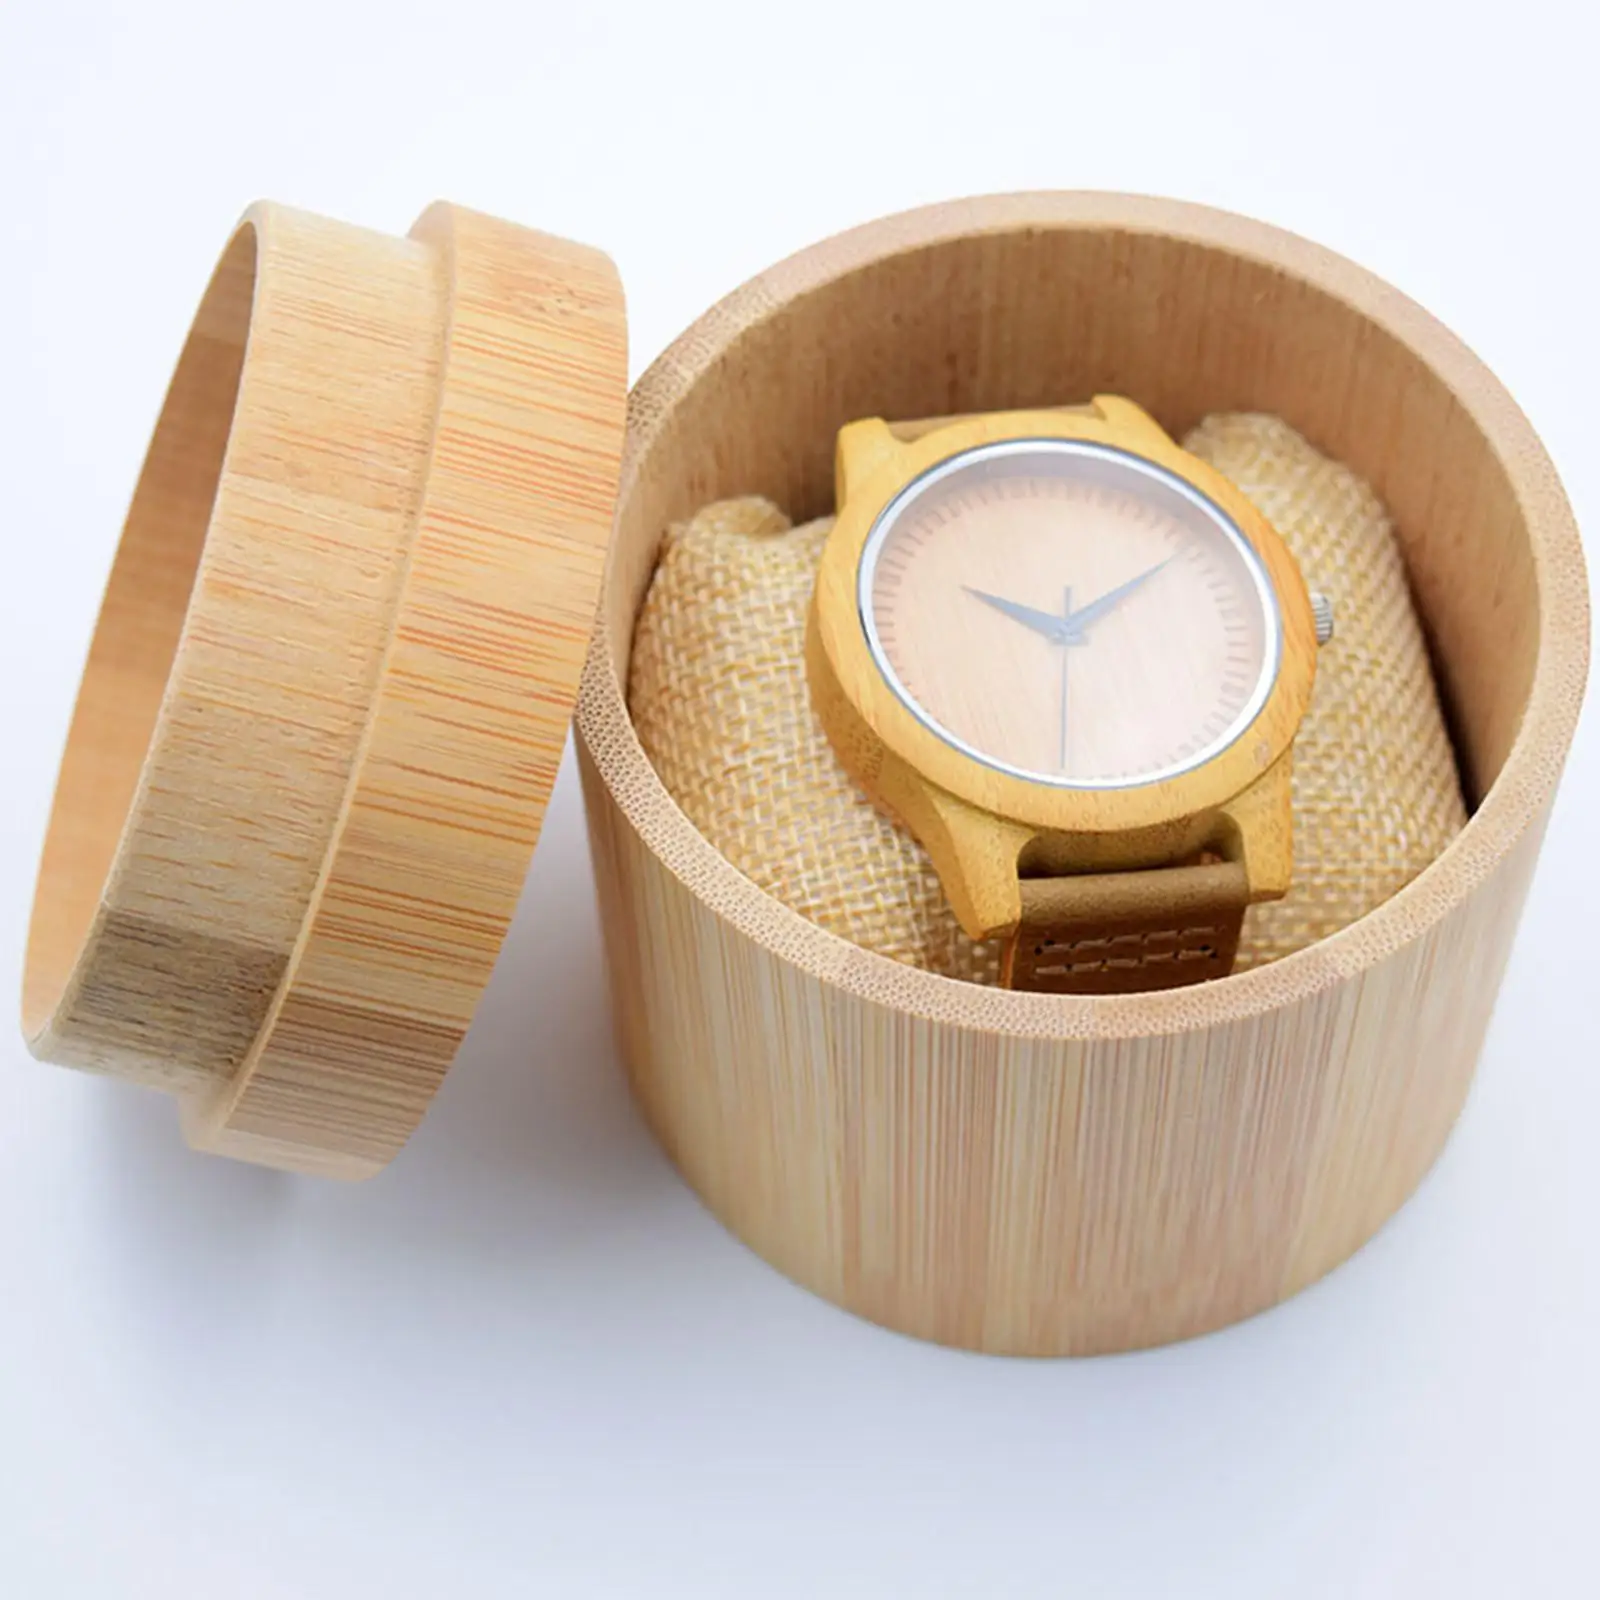 Portable Watch Storage Case with Cushion Single Slot for Bracelets Jewelry